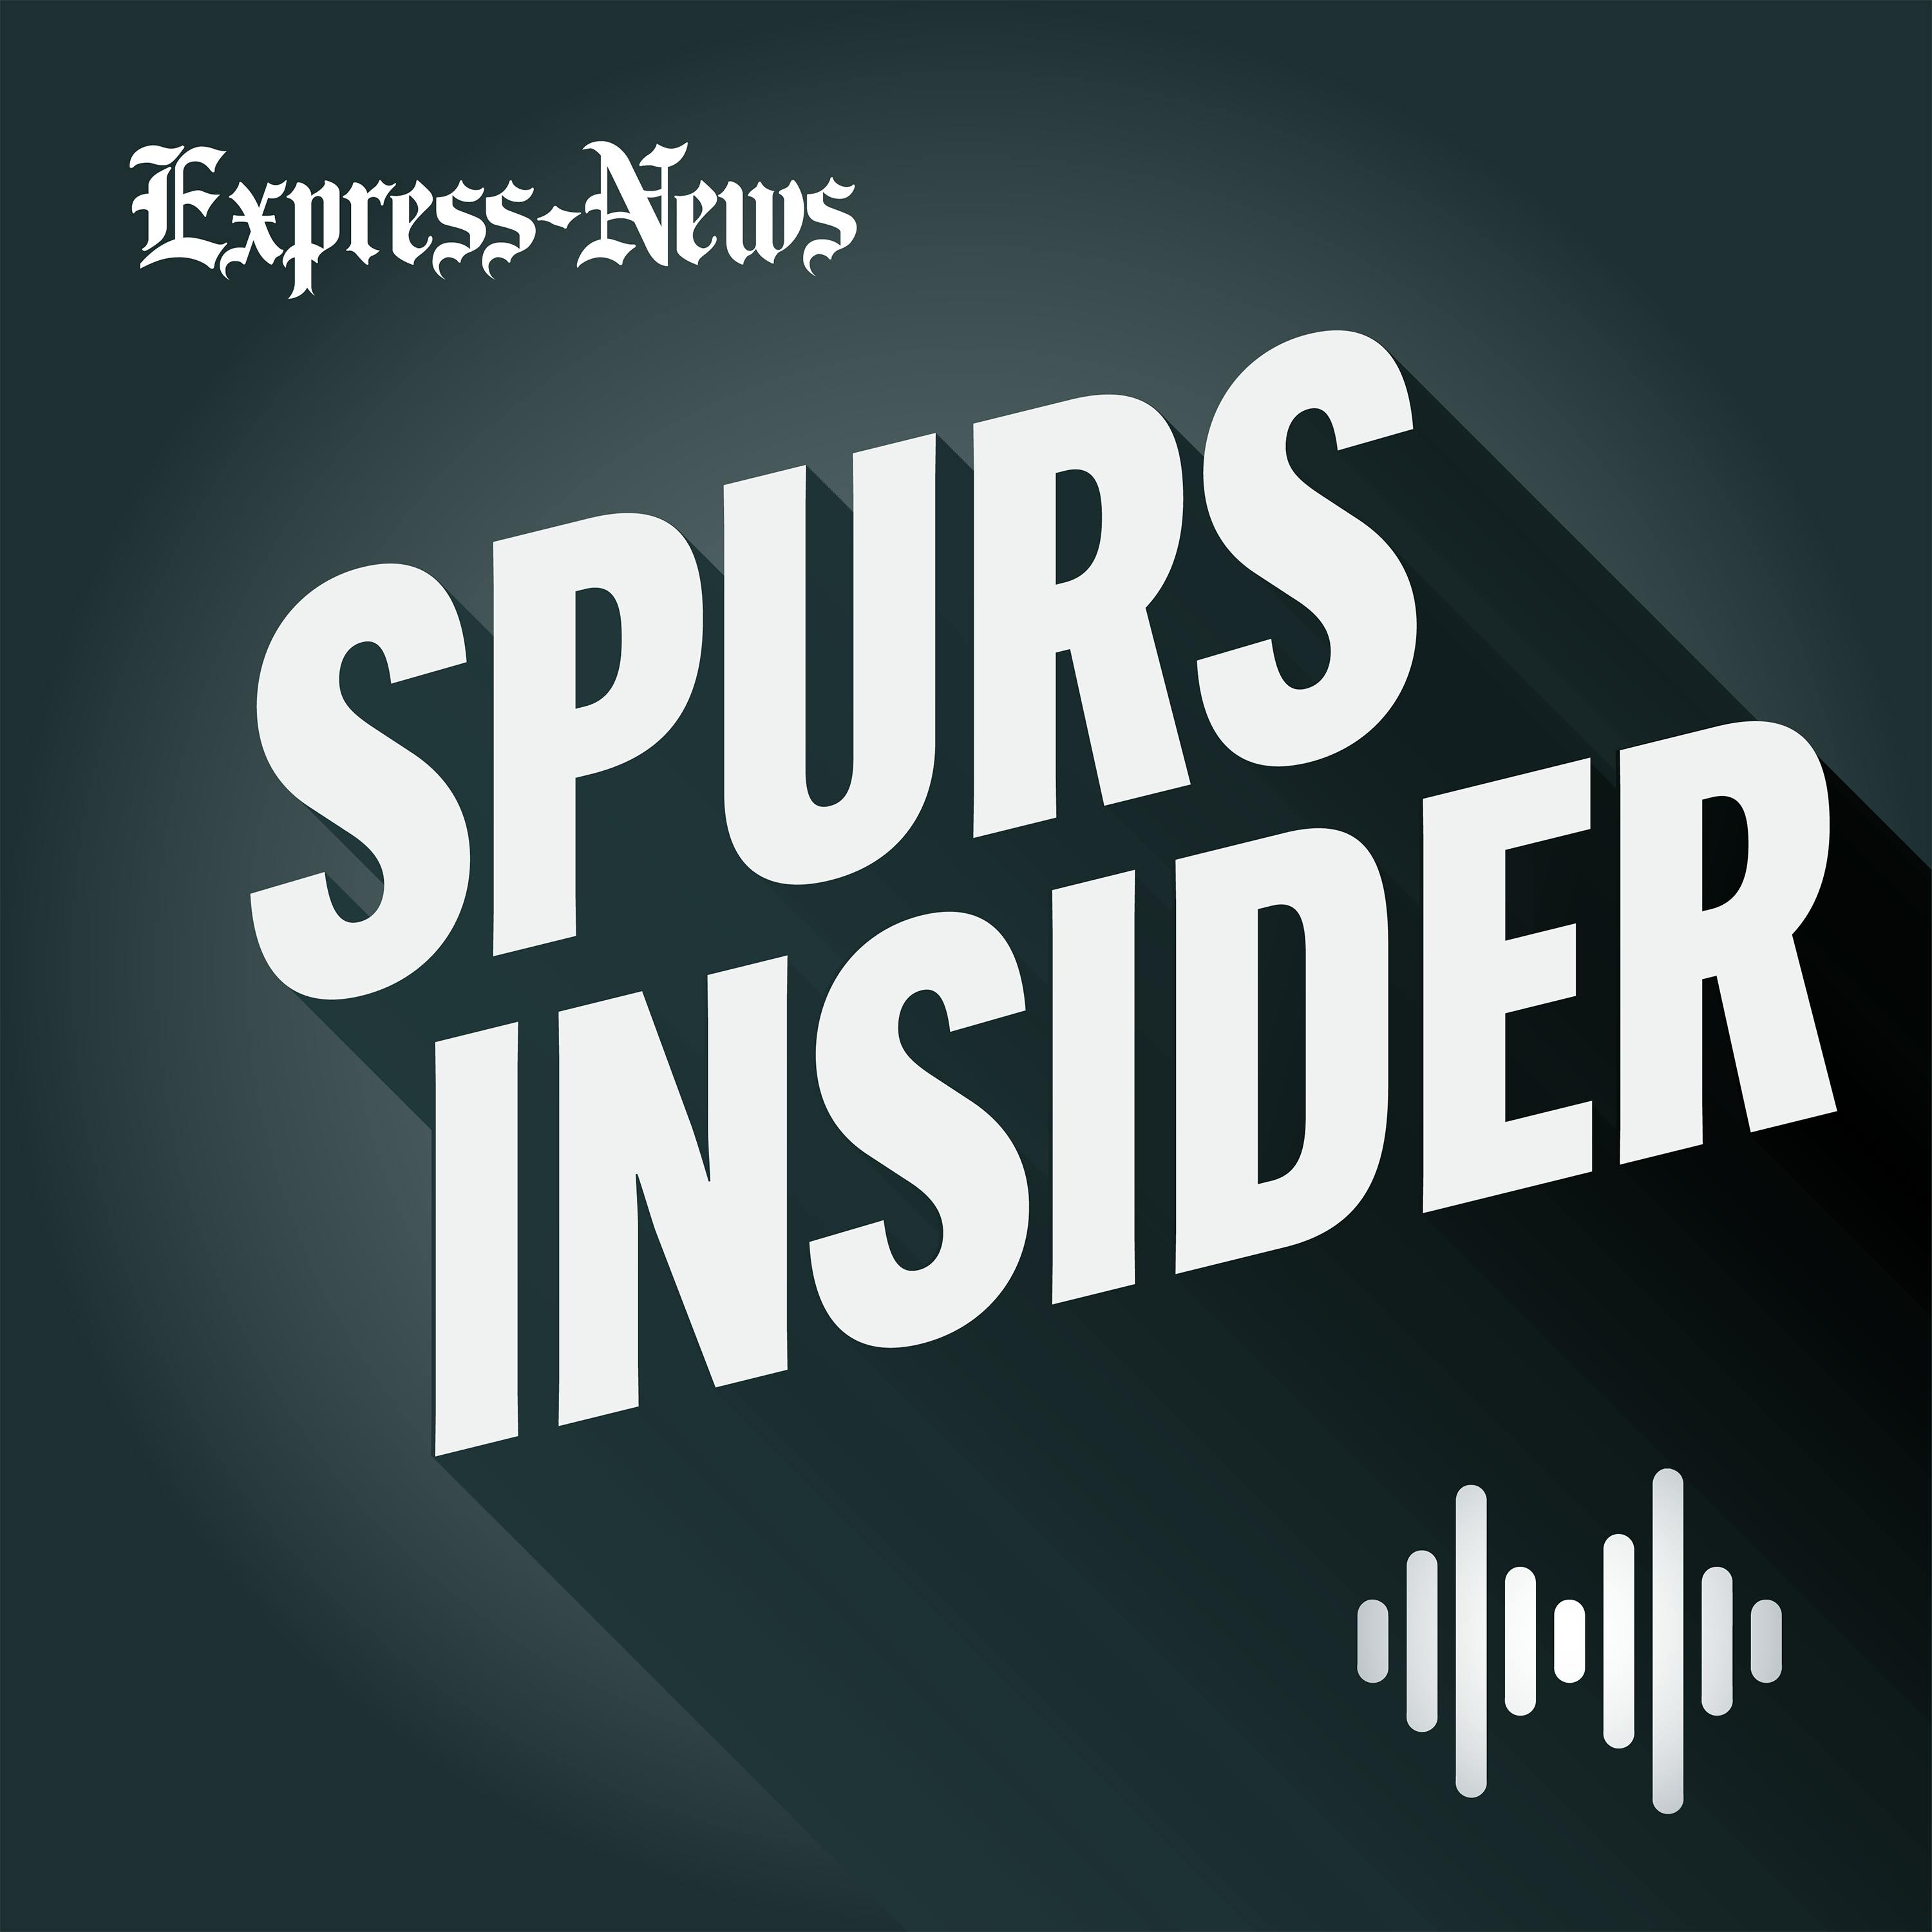 139. Injuries decimating this Spurs roster